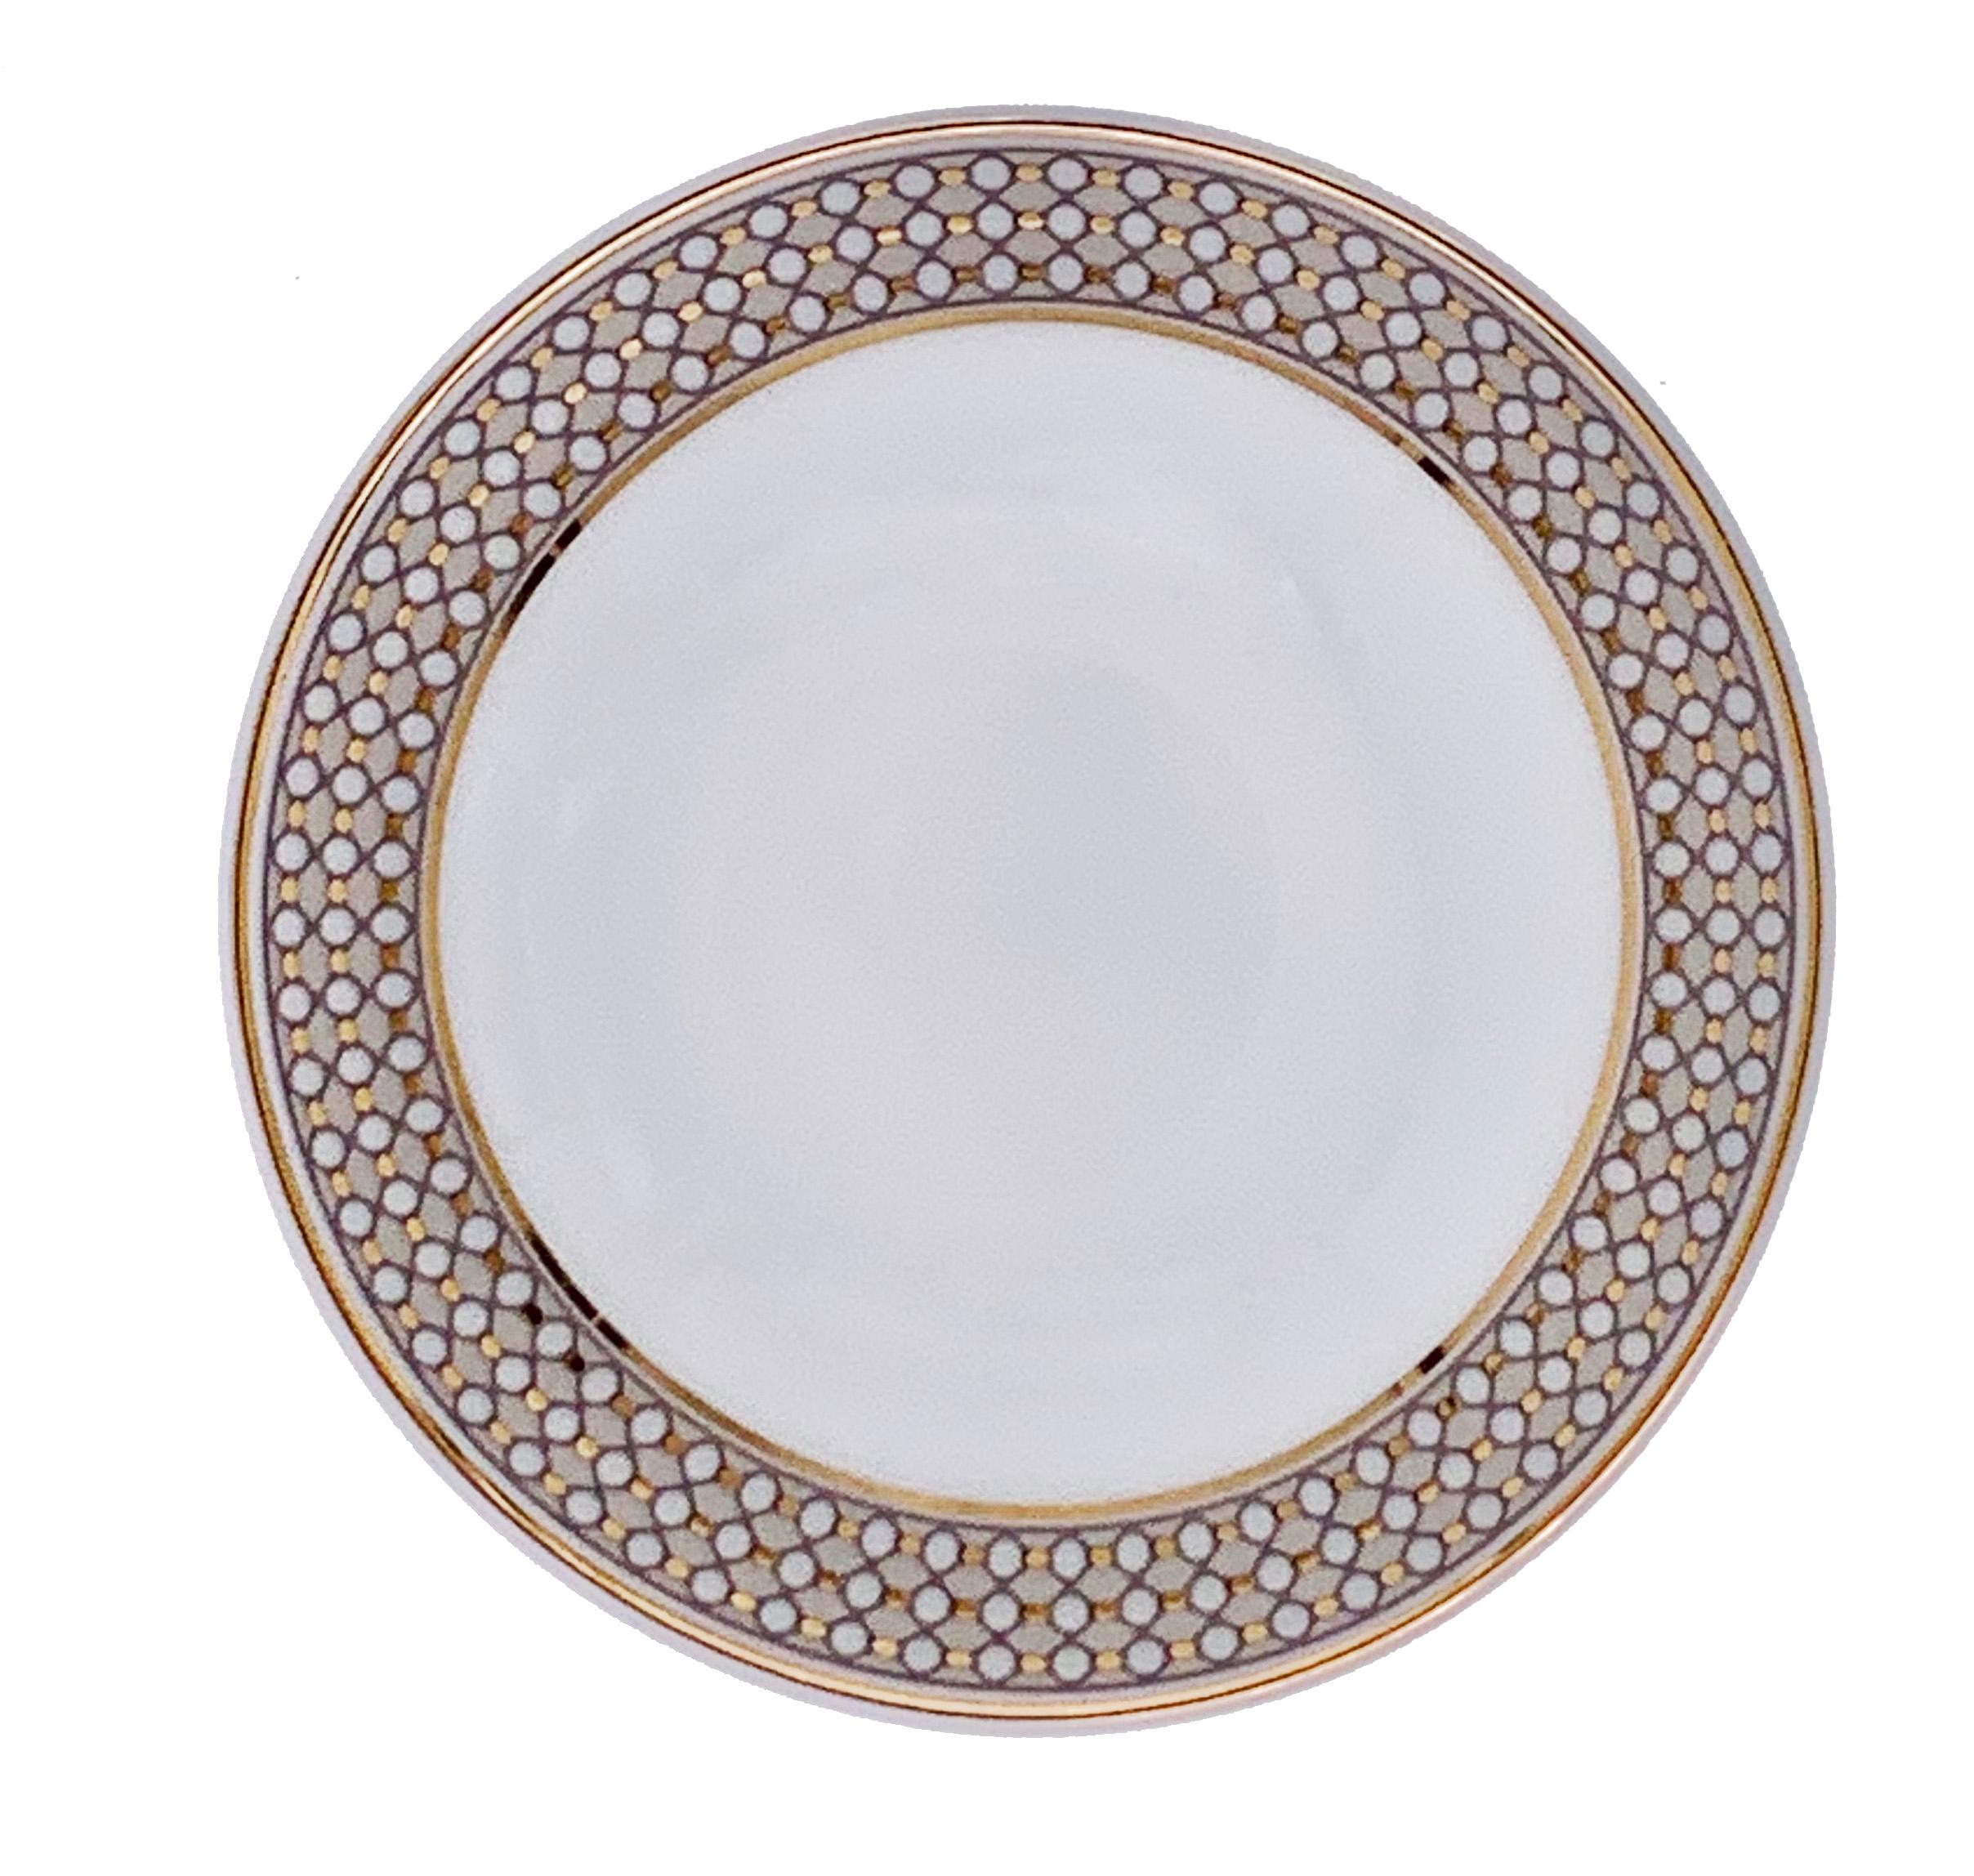 Larger quantities available upon request, with 8 weeks production time.

Description: Set of 2 medium sauce plate (2 pieces)
Color: Beige and gold
Size: 9 Ø x 2.5 H cm, 60 ml
Material: Porcelain and gold
Collection: Modern vintage.